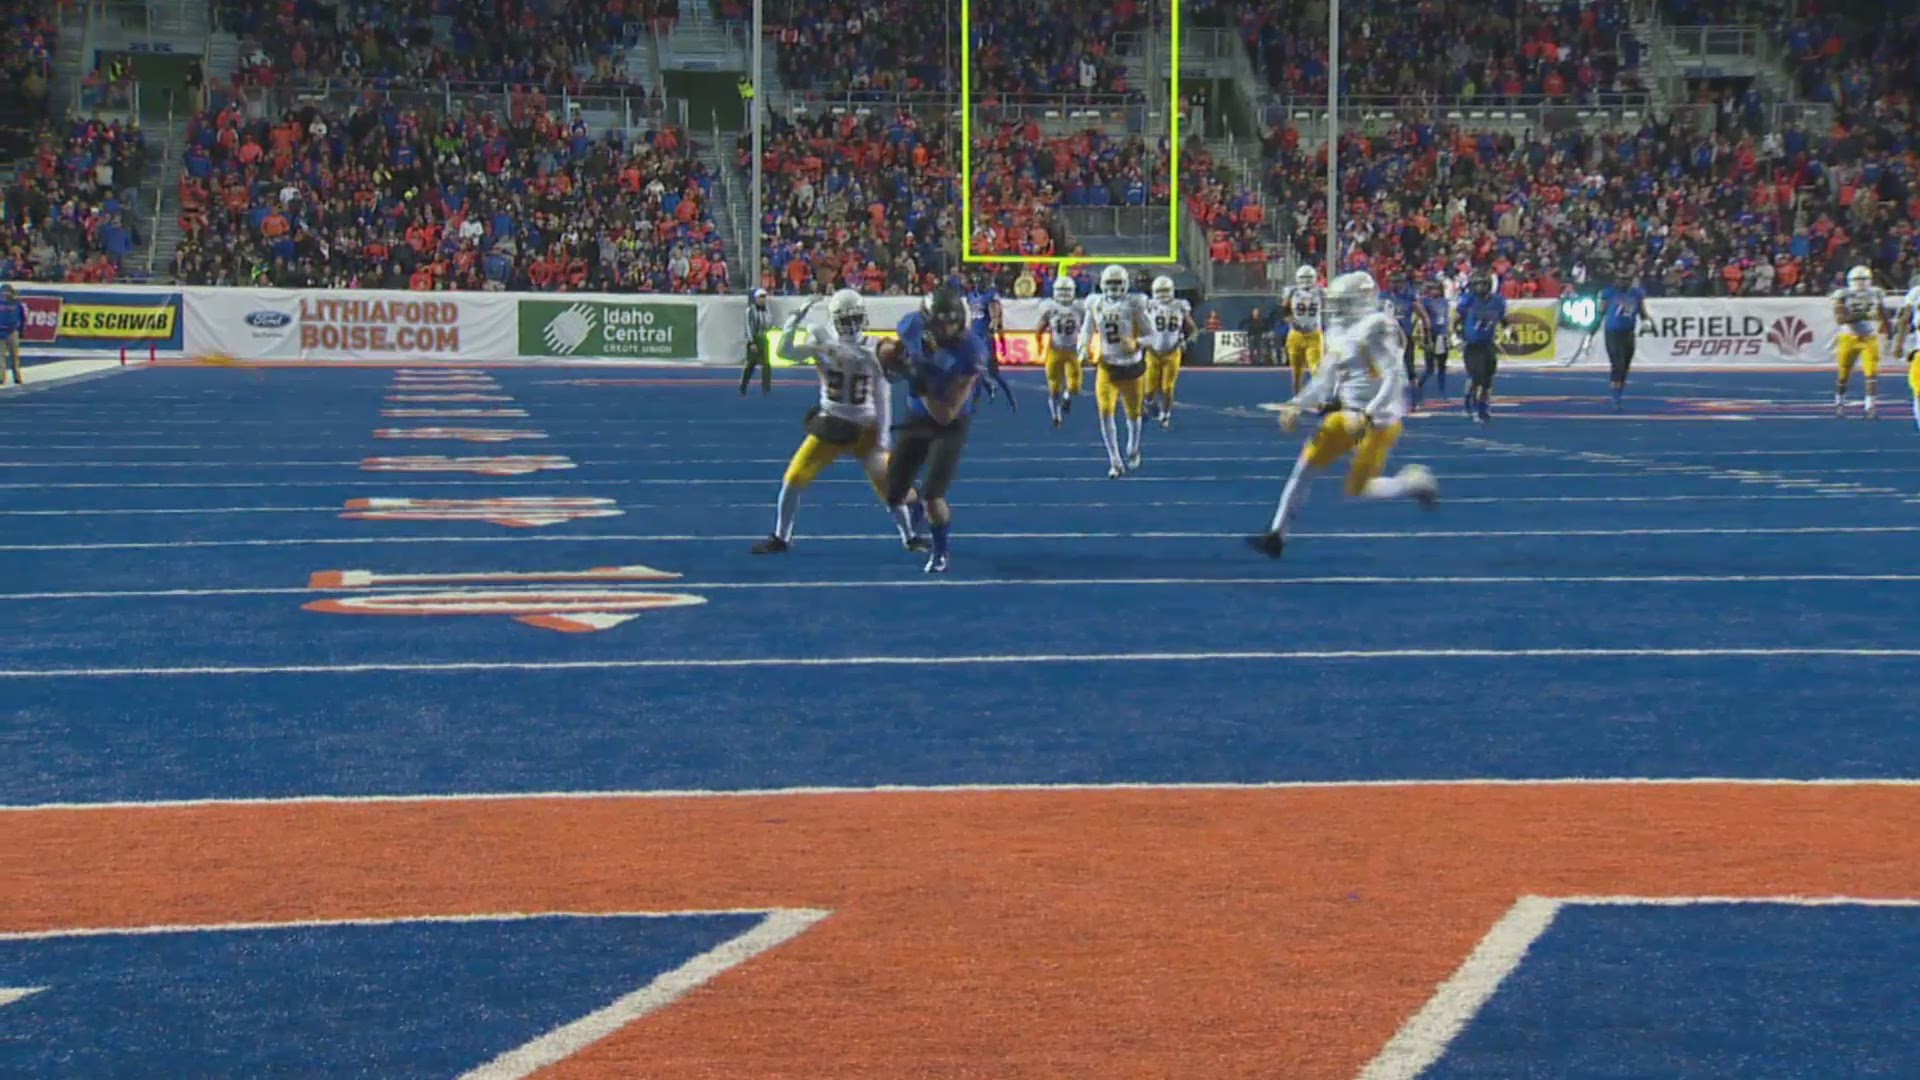 It's been over five years since Miller left Boise State, but he told KTVB that he's excited to get to work with a loaded and experienced wide receiving corp.